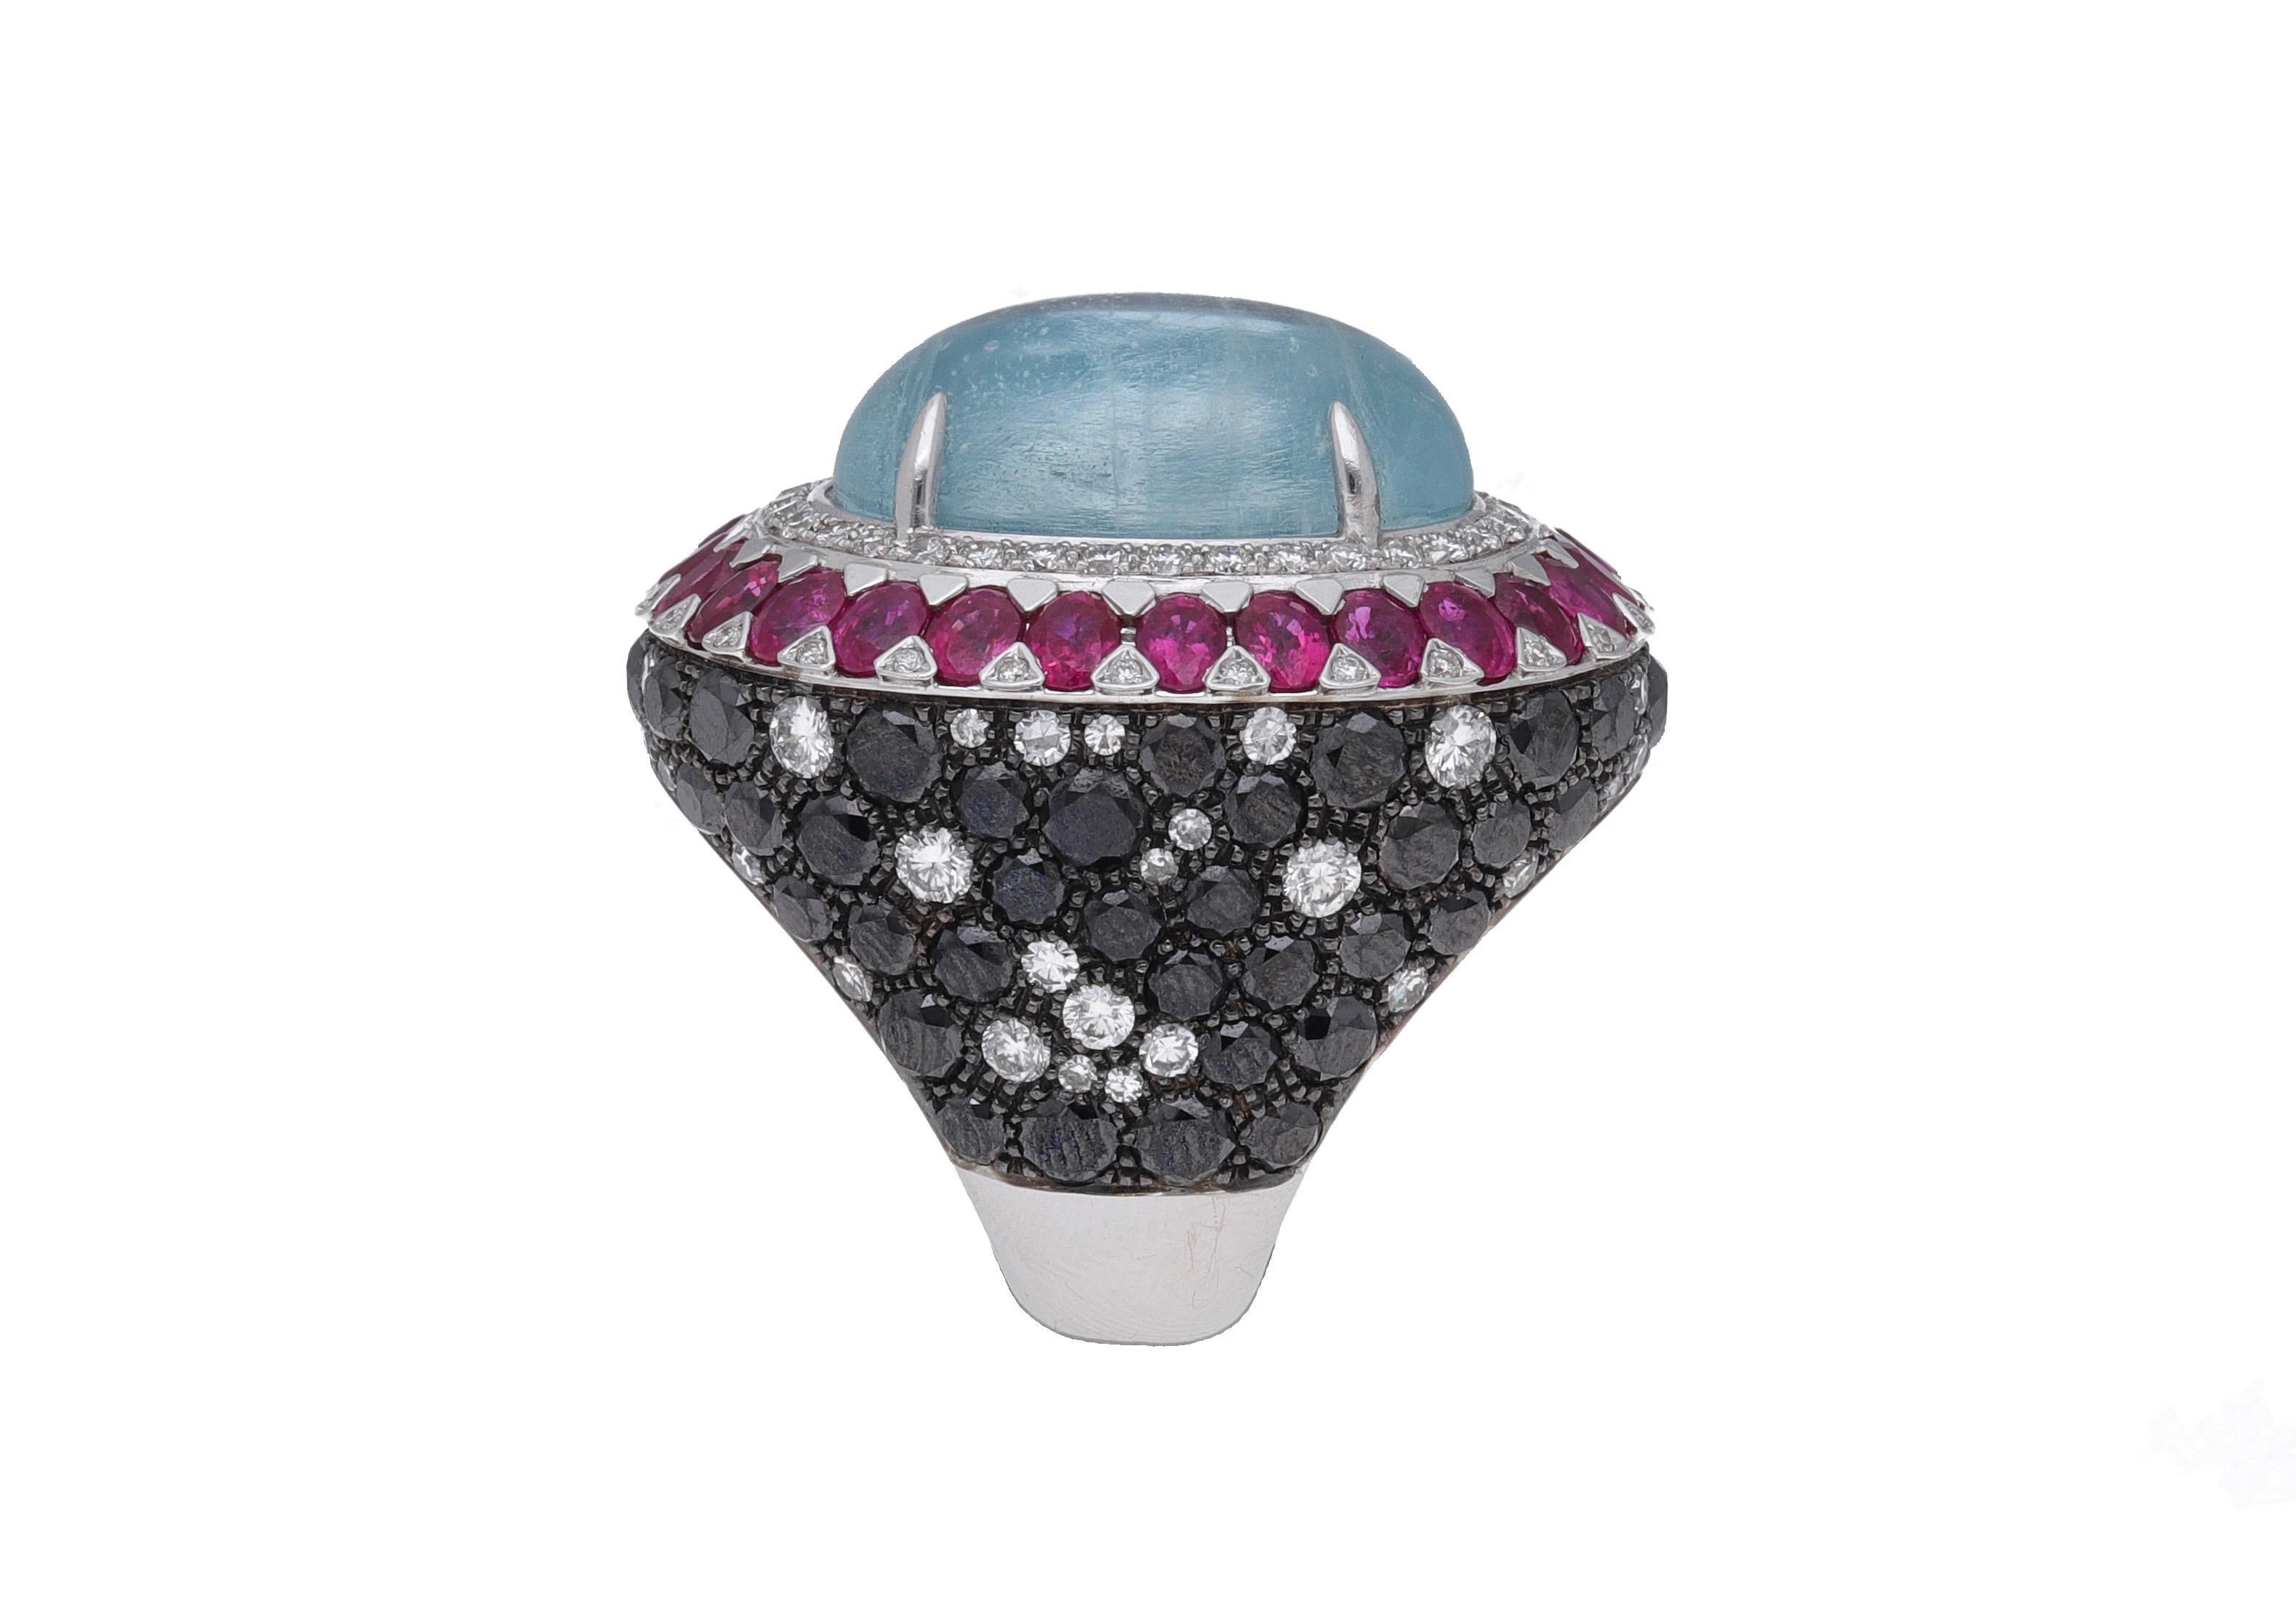 18 kt. white gold cocktail ring with 2.44 carats of round-cut diamonds ( H-I color / VVS1-VVS2 ), 9.67 carats of round-cut black diamonds, 6.29 carats of oval-cut rubies and 26.22 carats of aquamarine.
This one of a kind ring is entirely hand-made